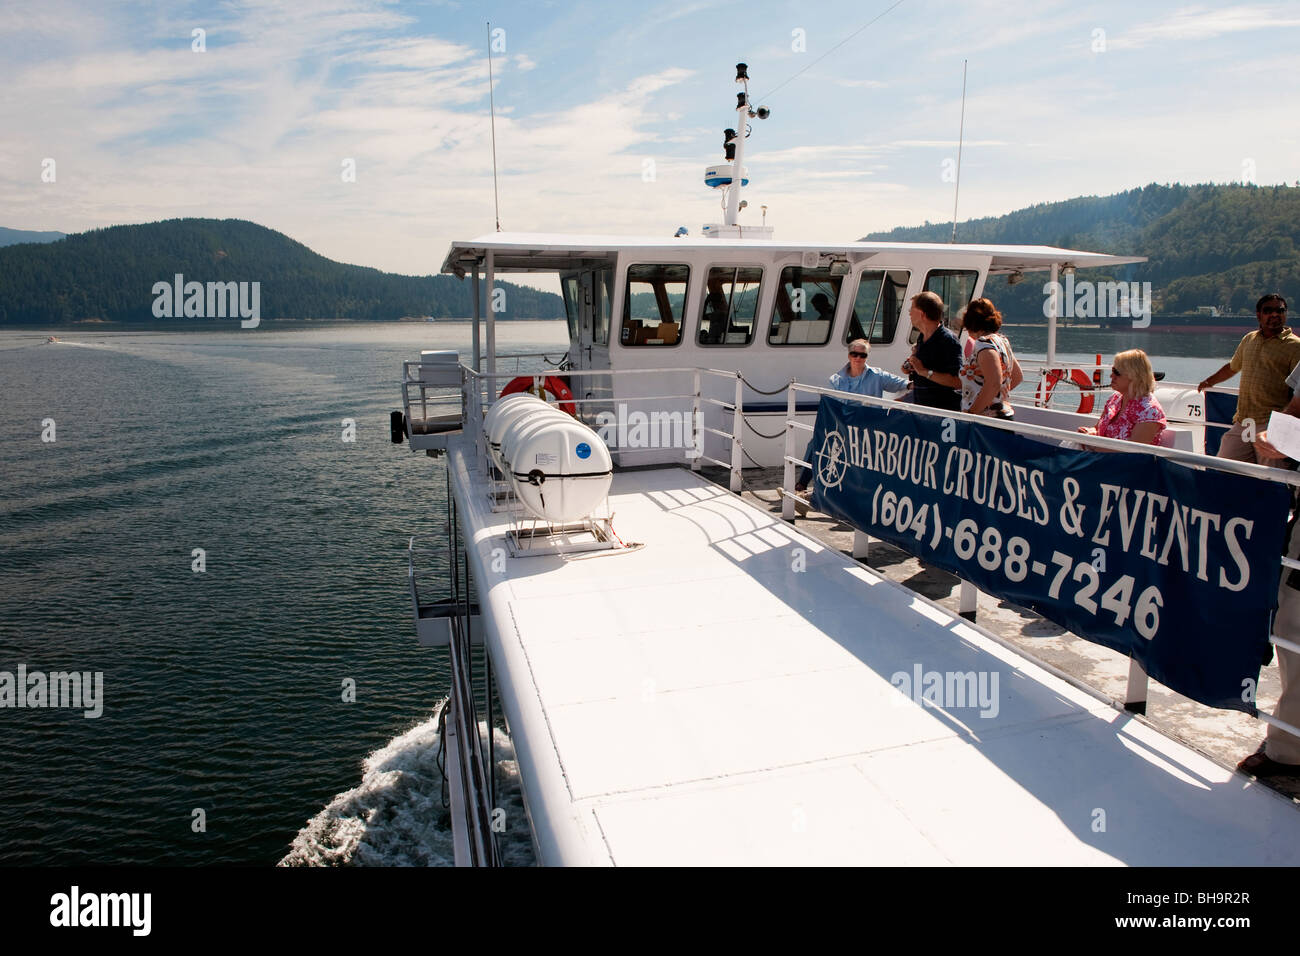 Harbour cruise boat in Indian Arm, near Vancouver, BC, Canada. Stock Photo